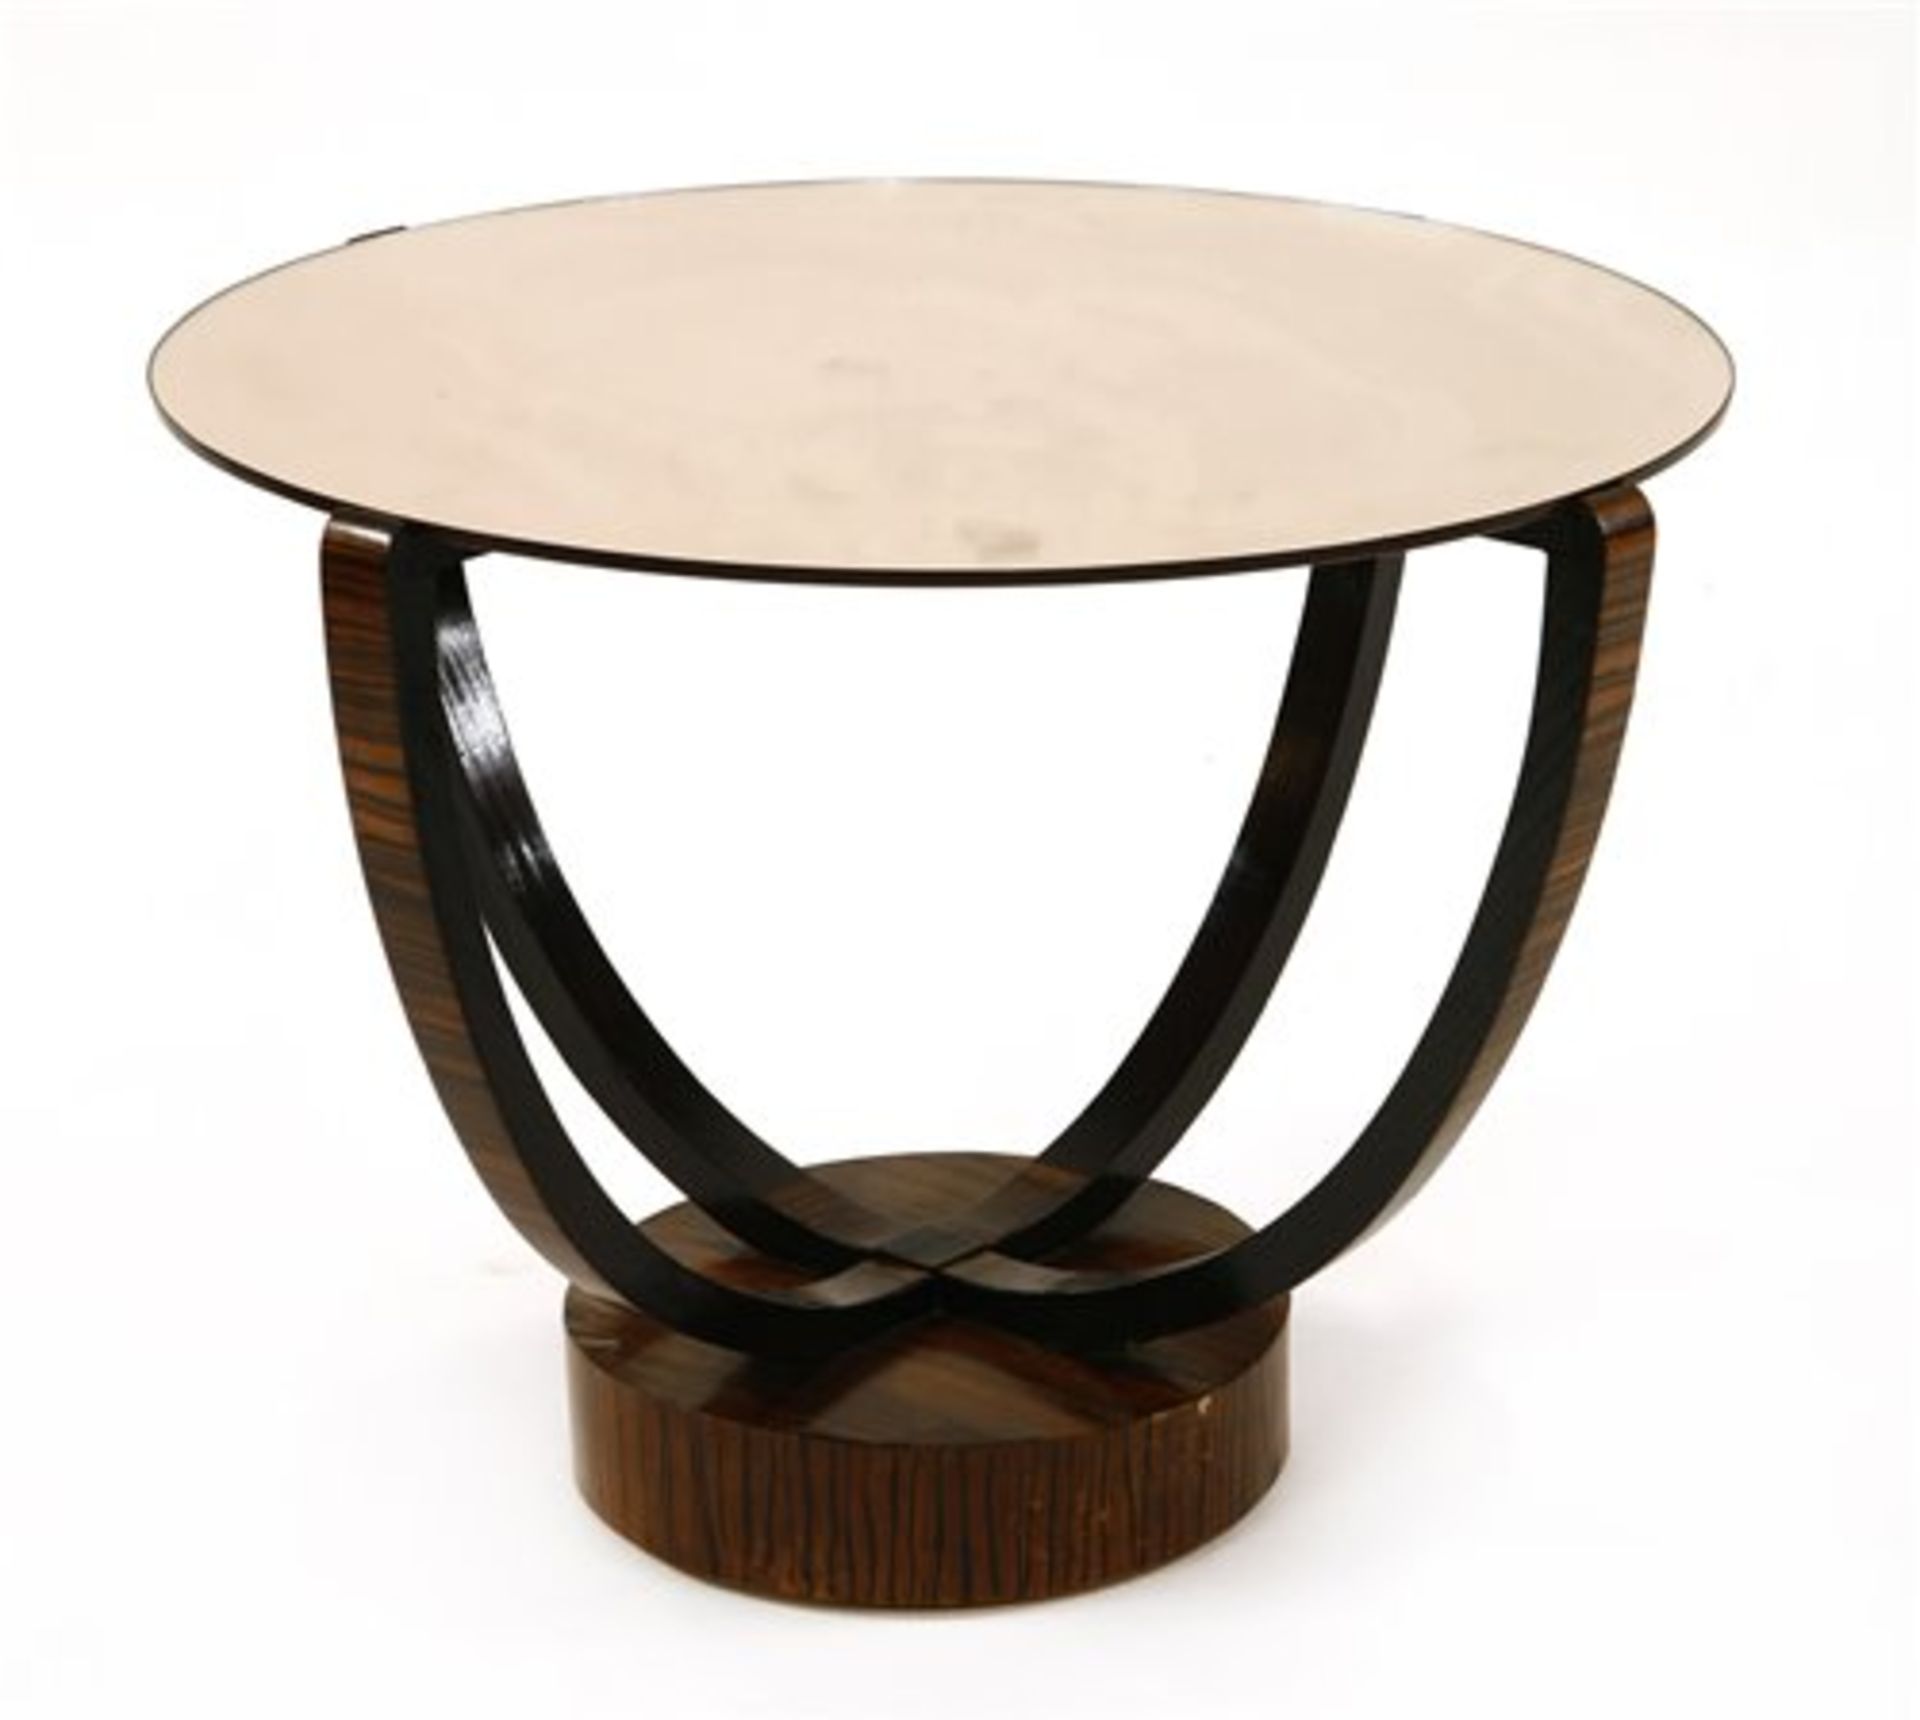 An Art Deco mirrored occasional table